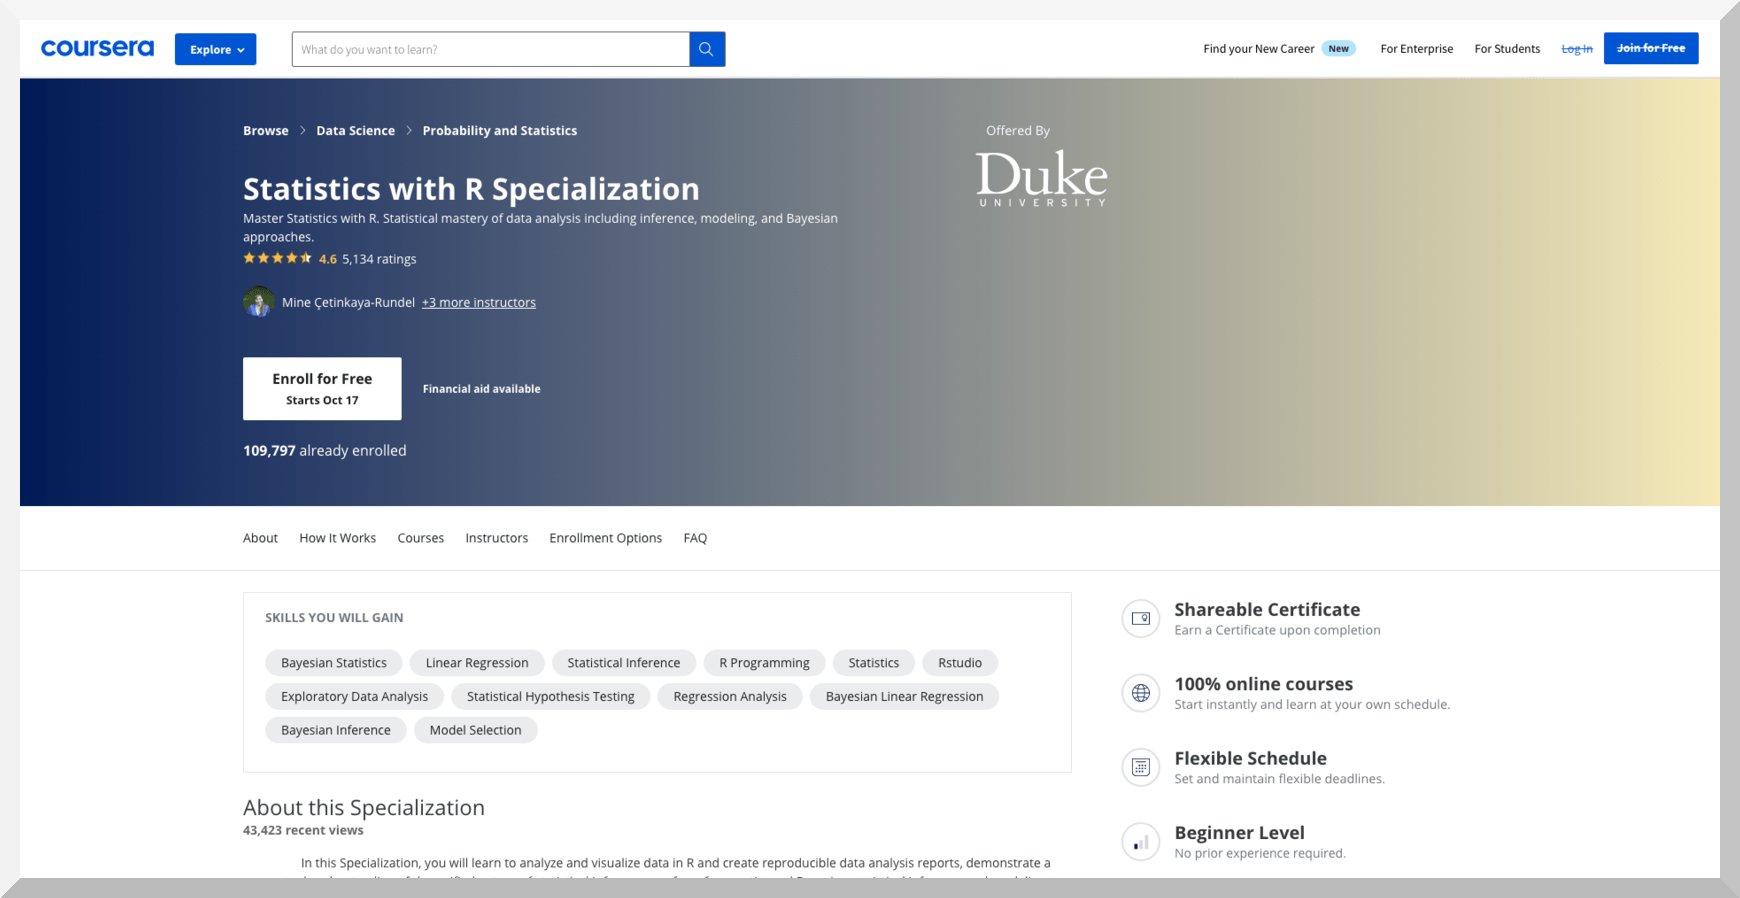 Statistics with R Specialization by Duke University – Coursera